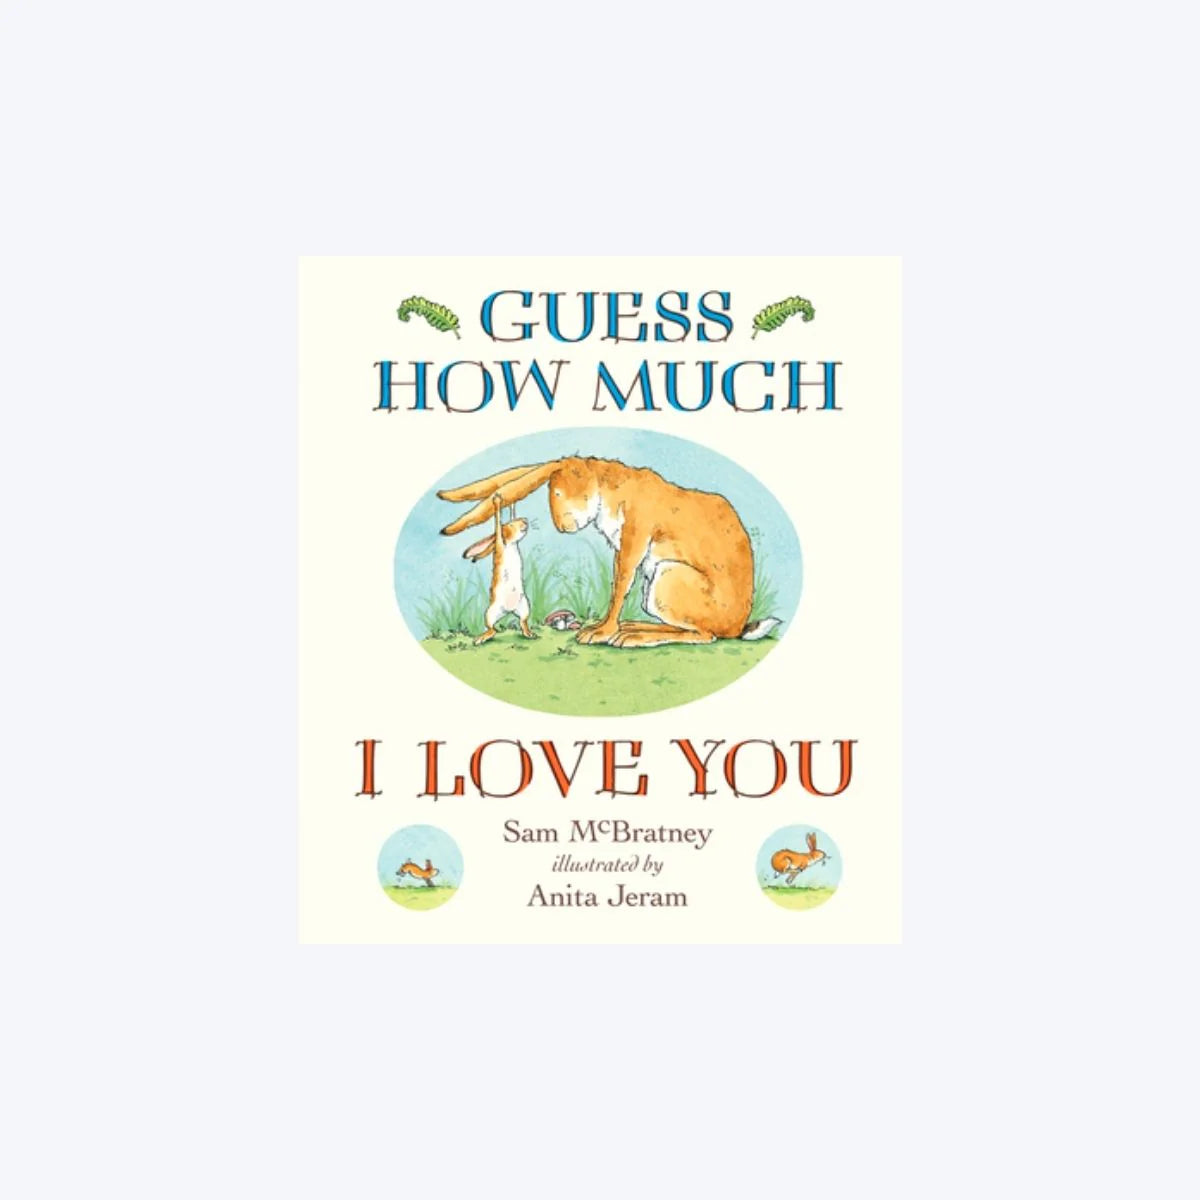 Guess How Much I Love You board book by Sam McBratney